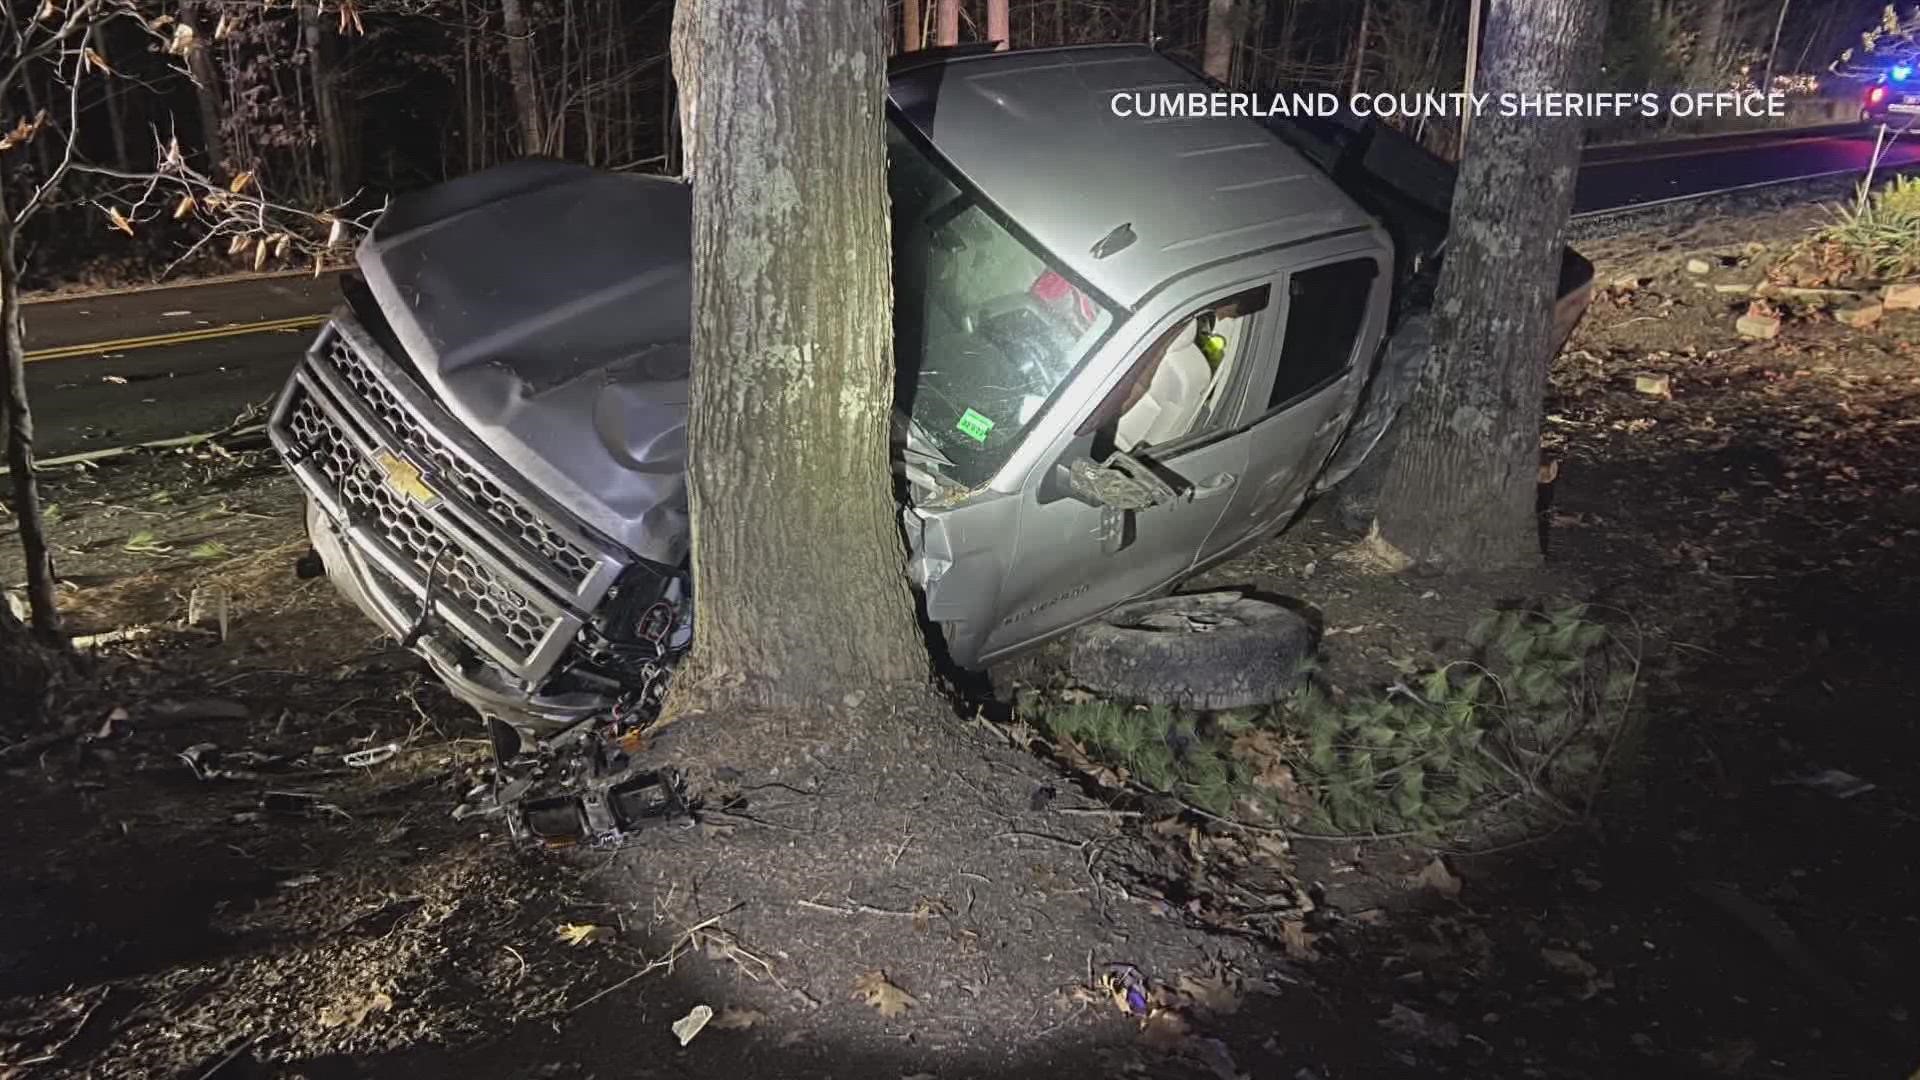 The cause of the crash on Bony Eagle Road is under investigation, but officials said speed and alcohol appear to be factors.